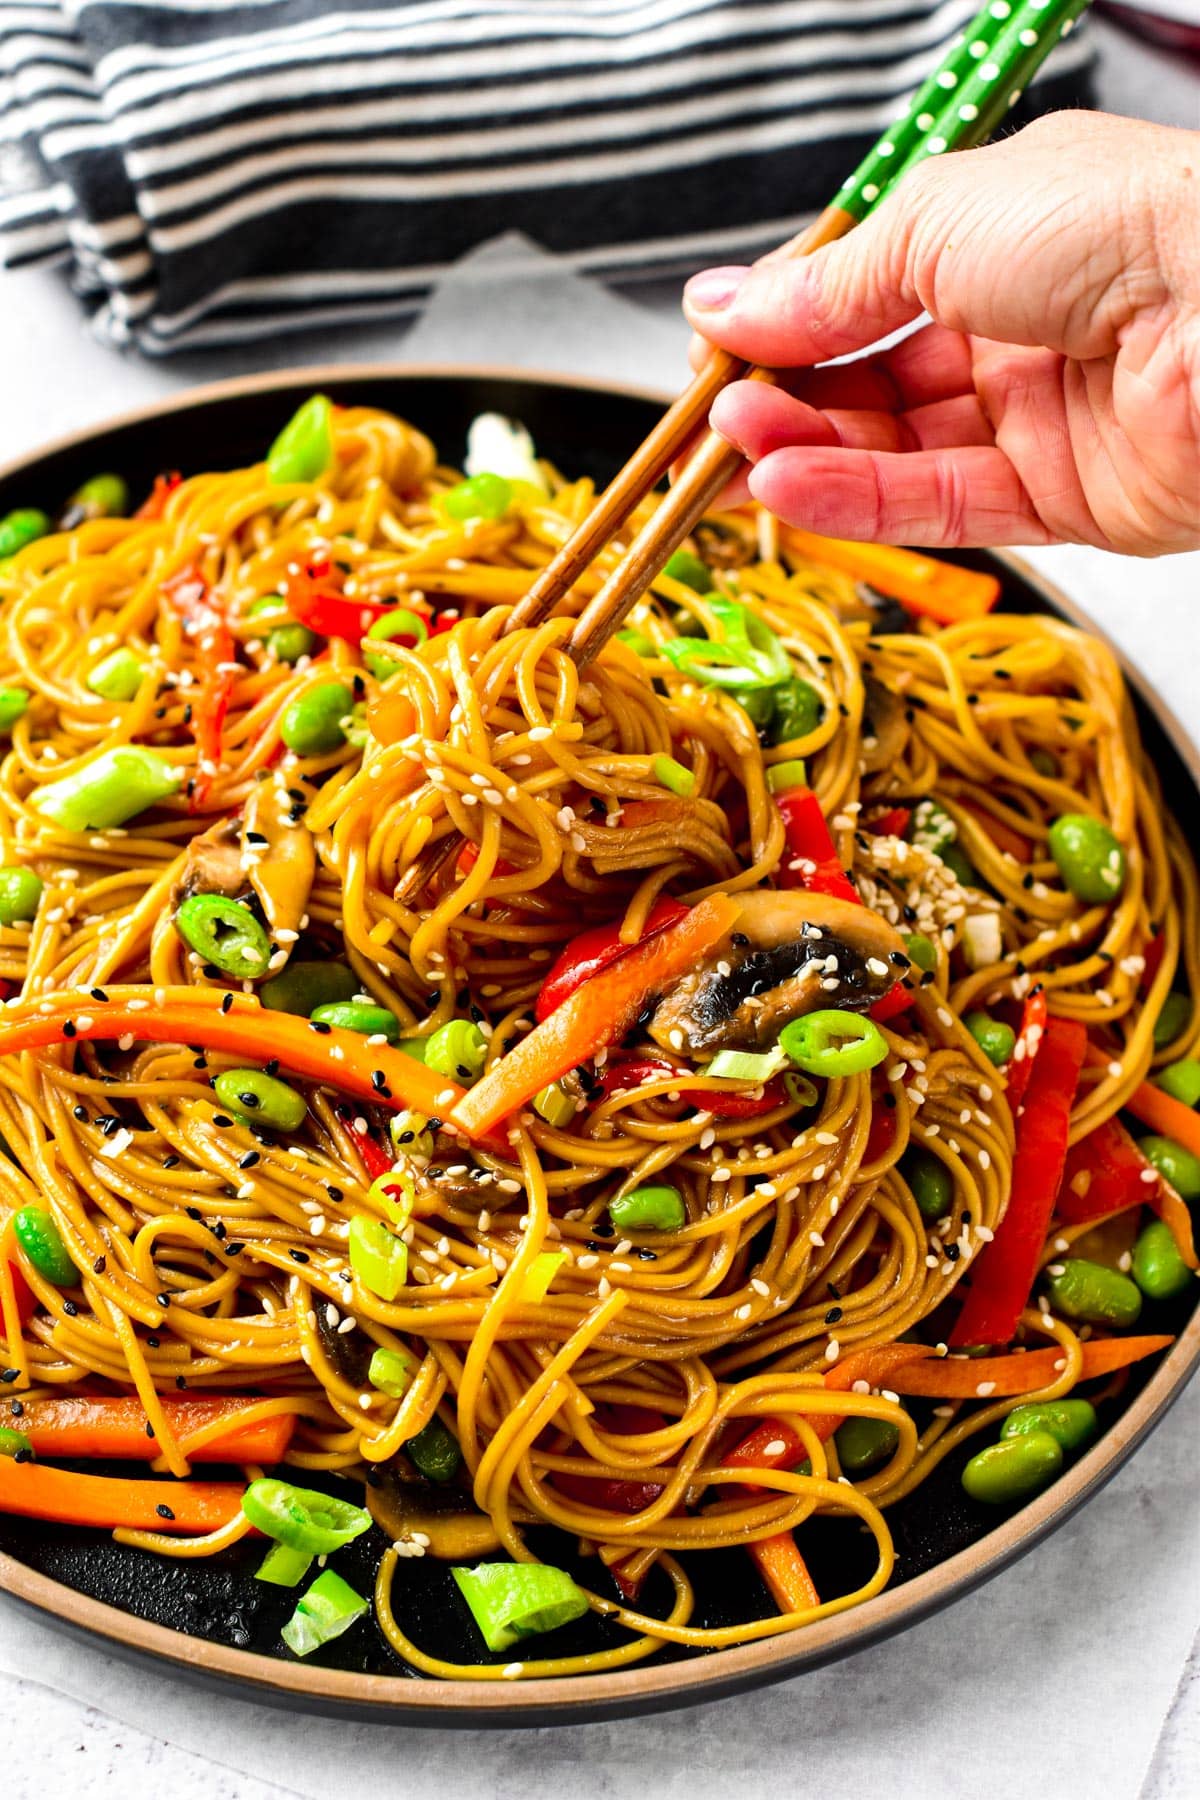 These teriyaki noodles are easy 20 minutes Japanese ramen noodles cooked in a lightly sweet teriyaki sauce with crunchy vegetables. Plus, this noodle recipe is also vegan-approved.